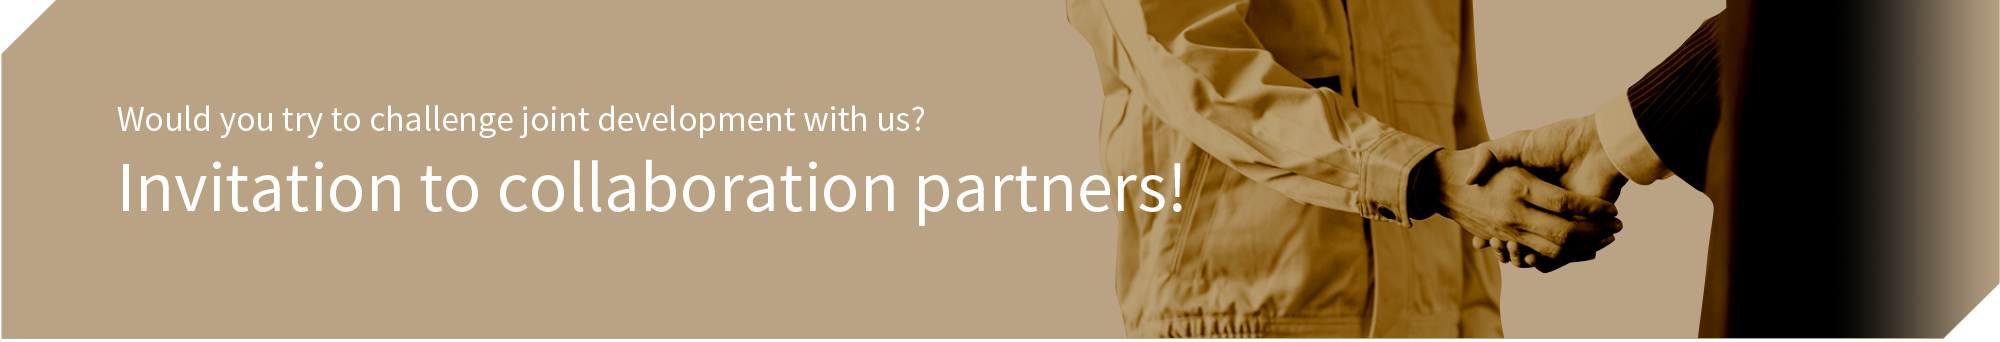 Would you try to challenge joint development with us? Invitation to collaboration partners!